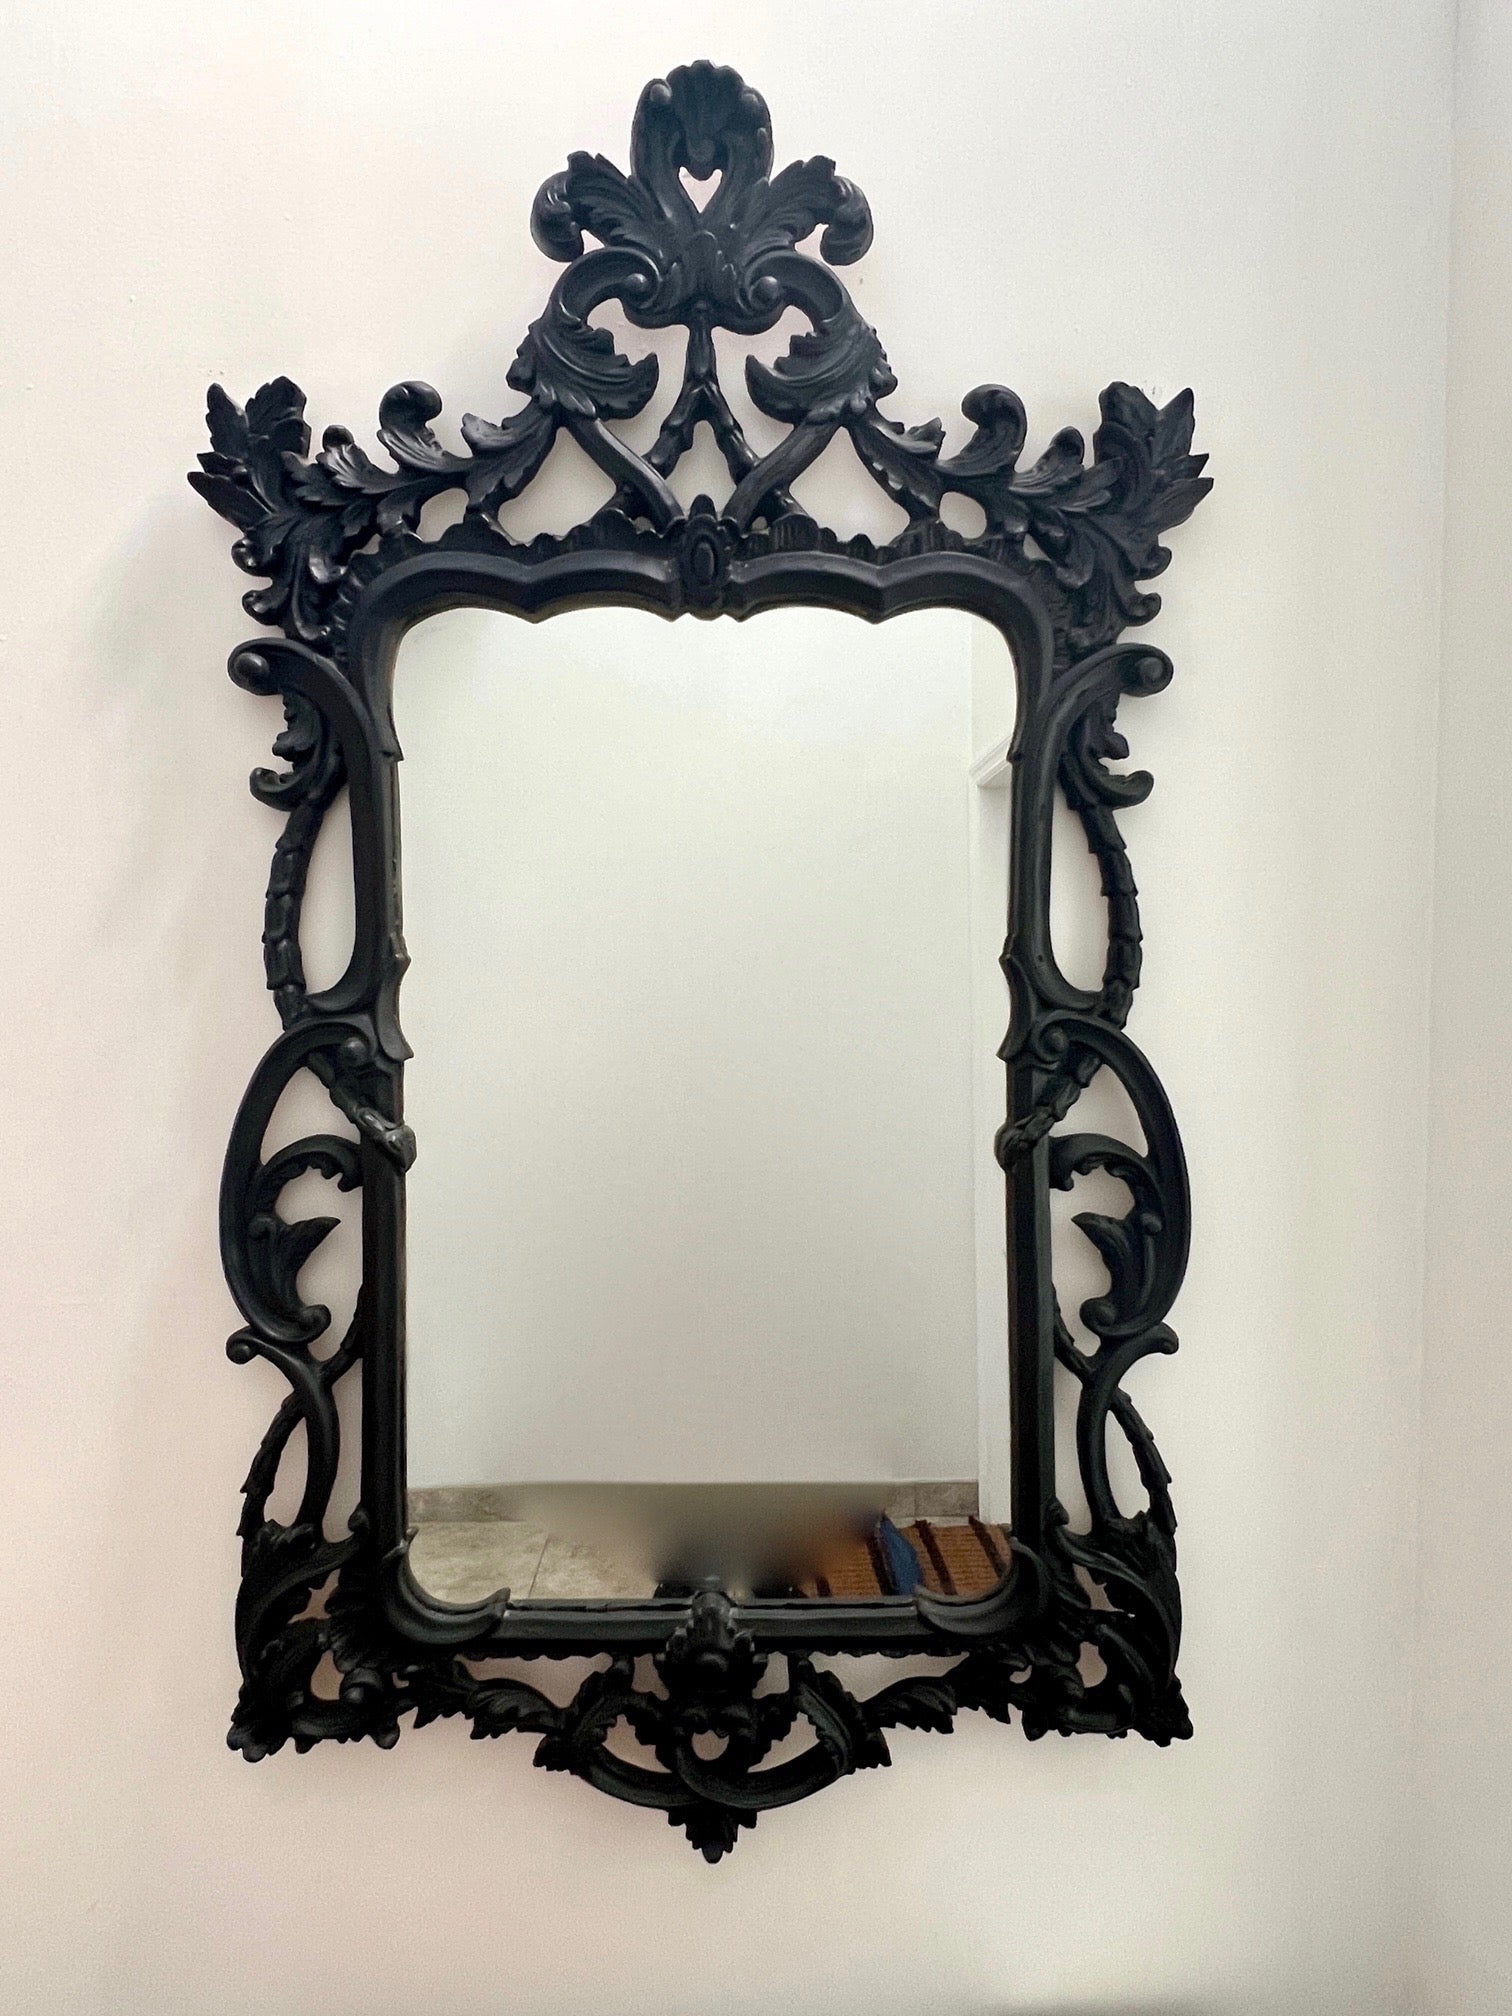 Hand-Carved Hollywood Regency Black Carved Wood Mirror with Rococo Frame, Italy C. 1970's For Sale